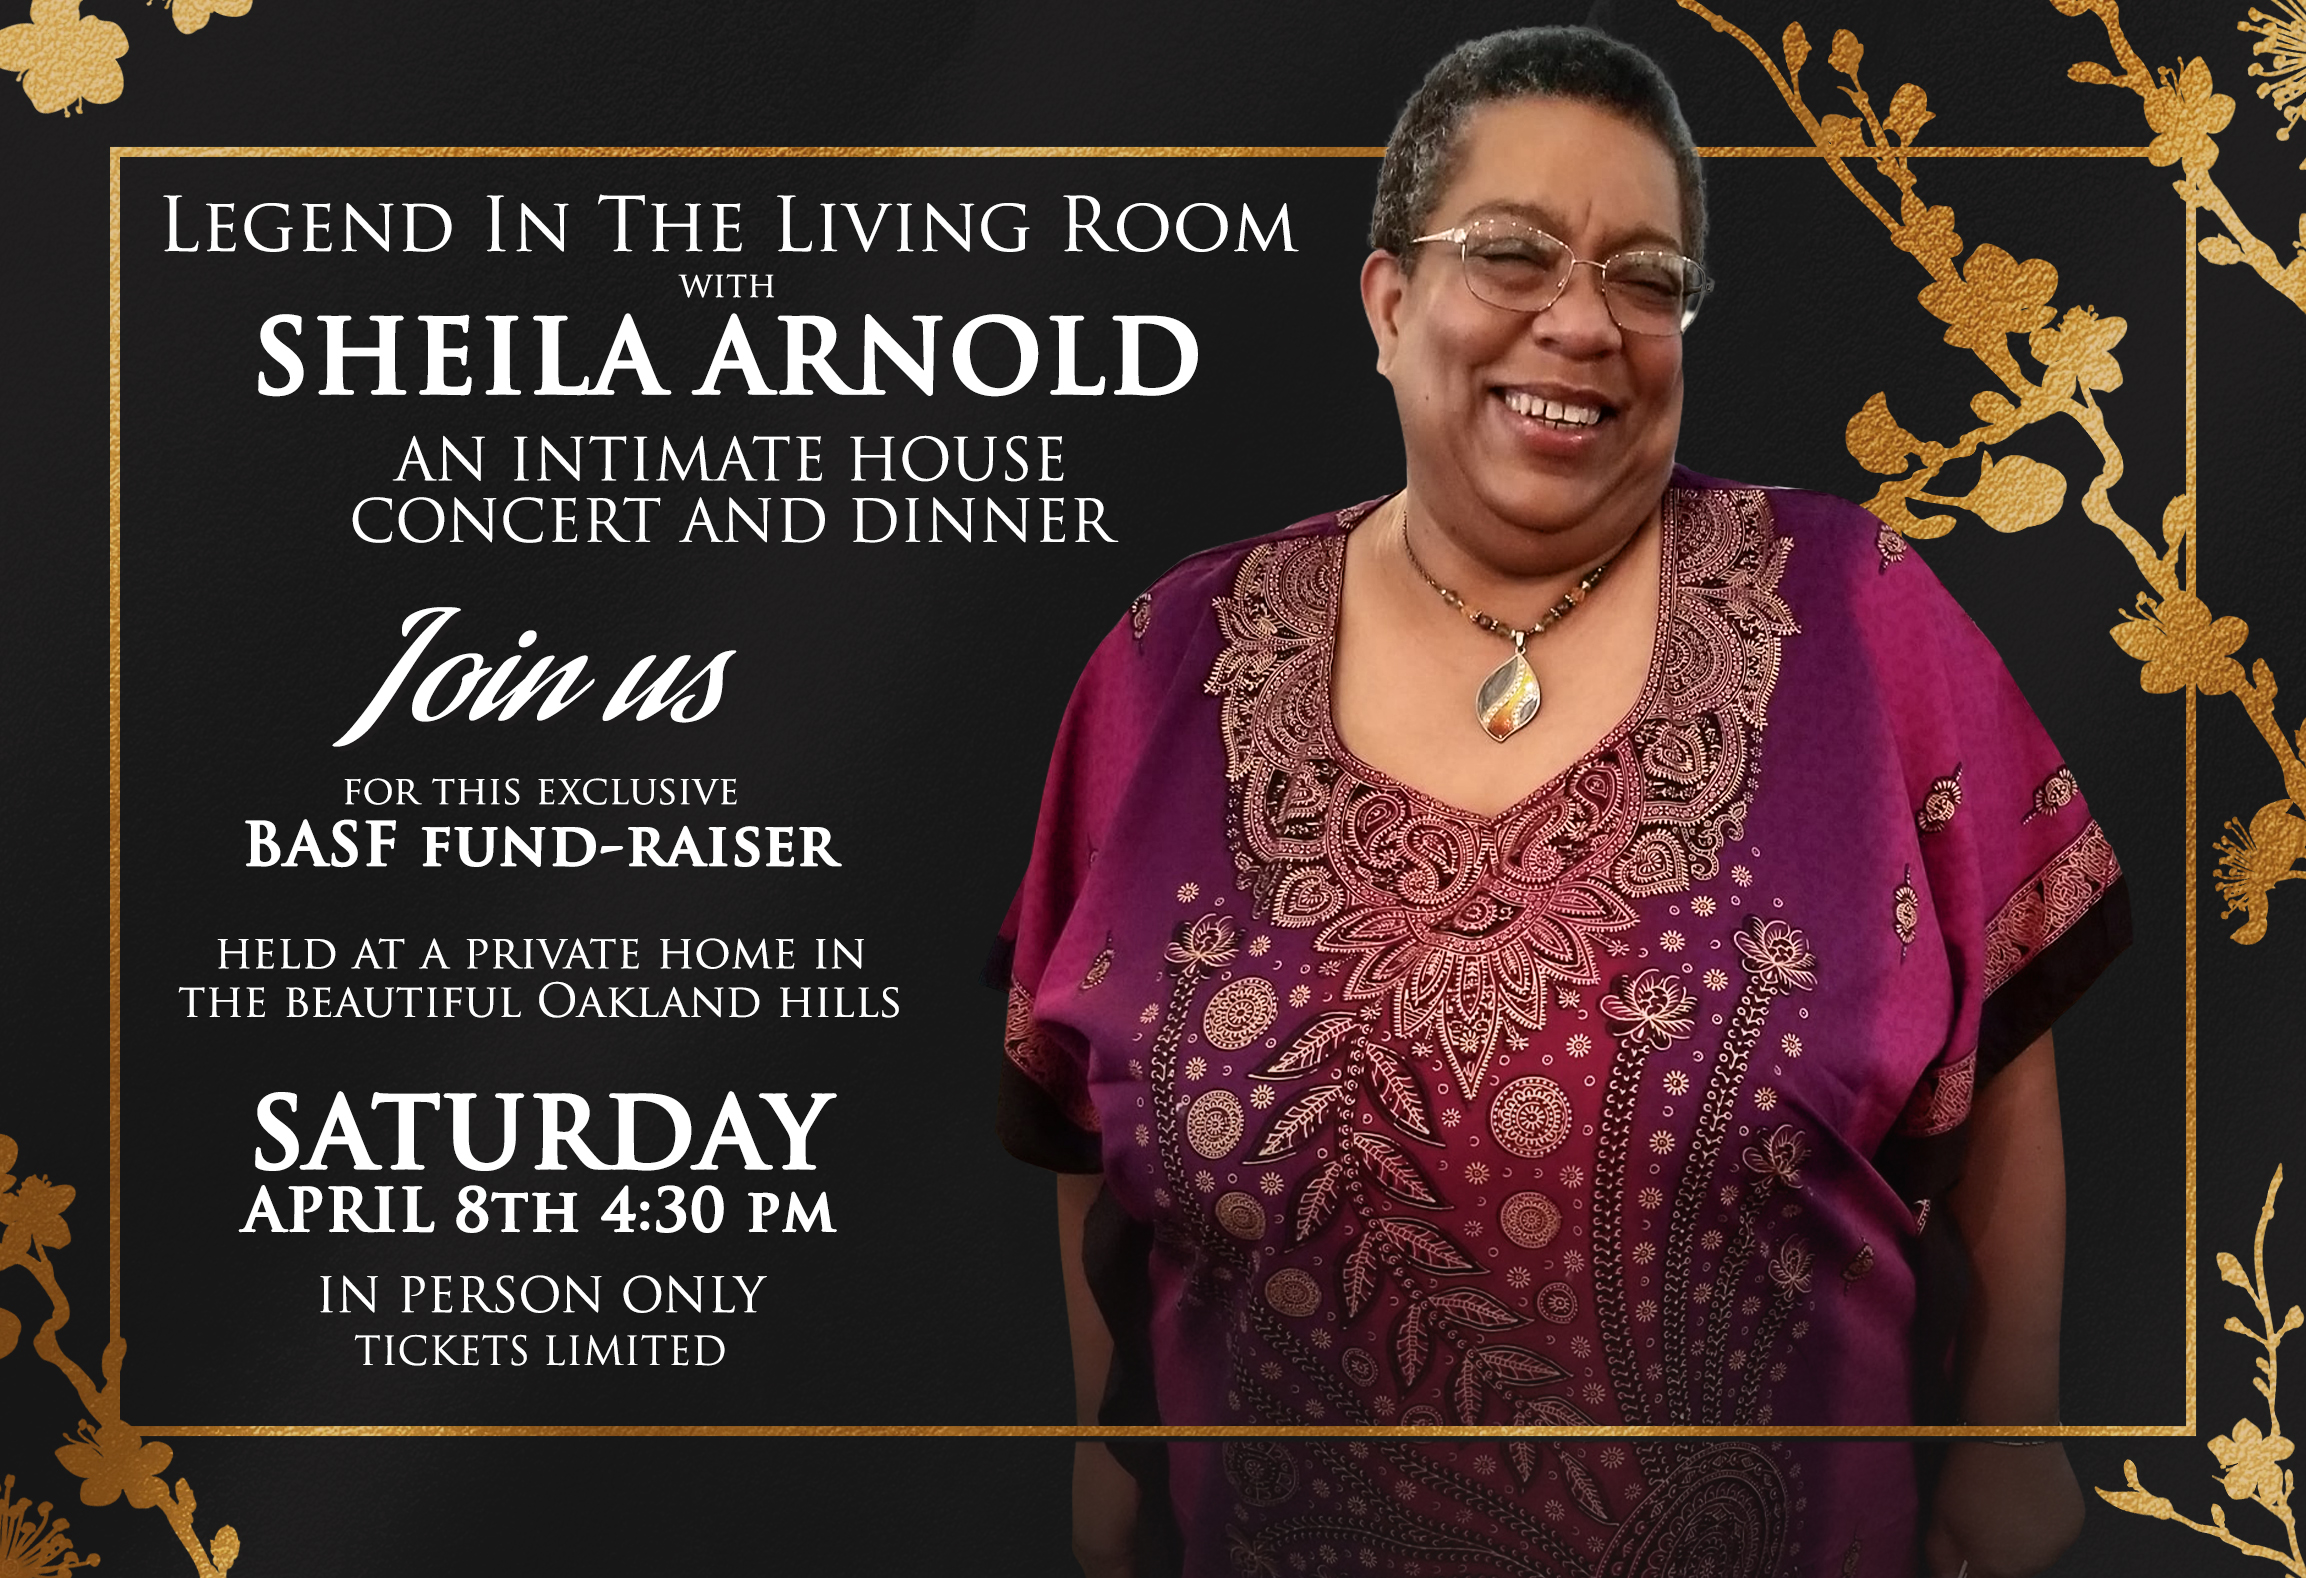 Legend in the Living Room with Sheila Arnold